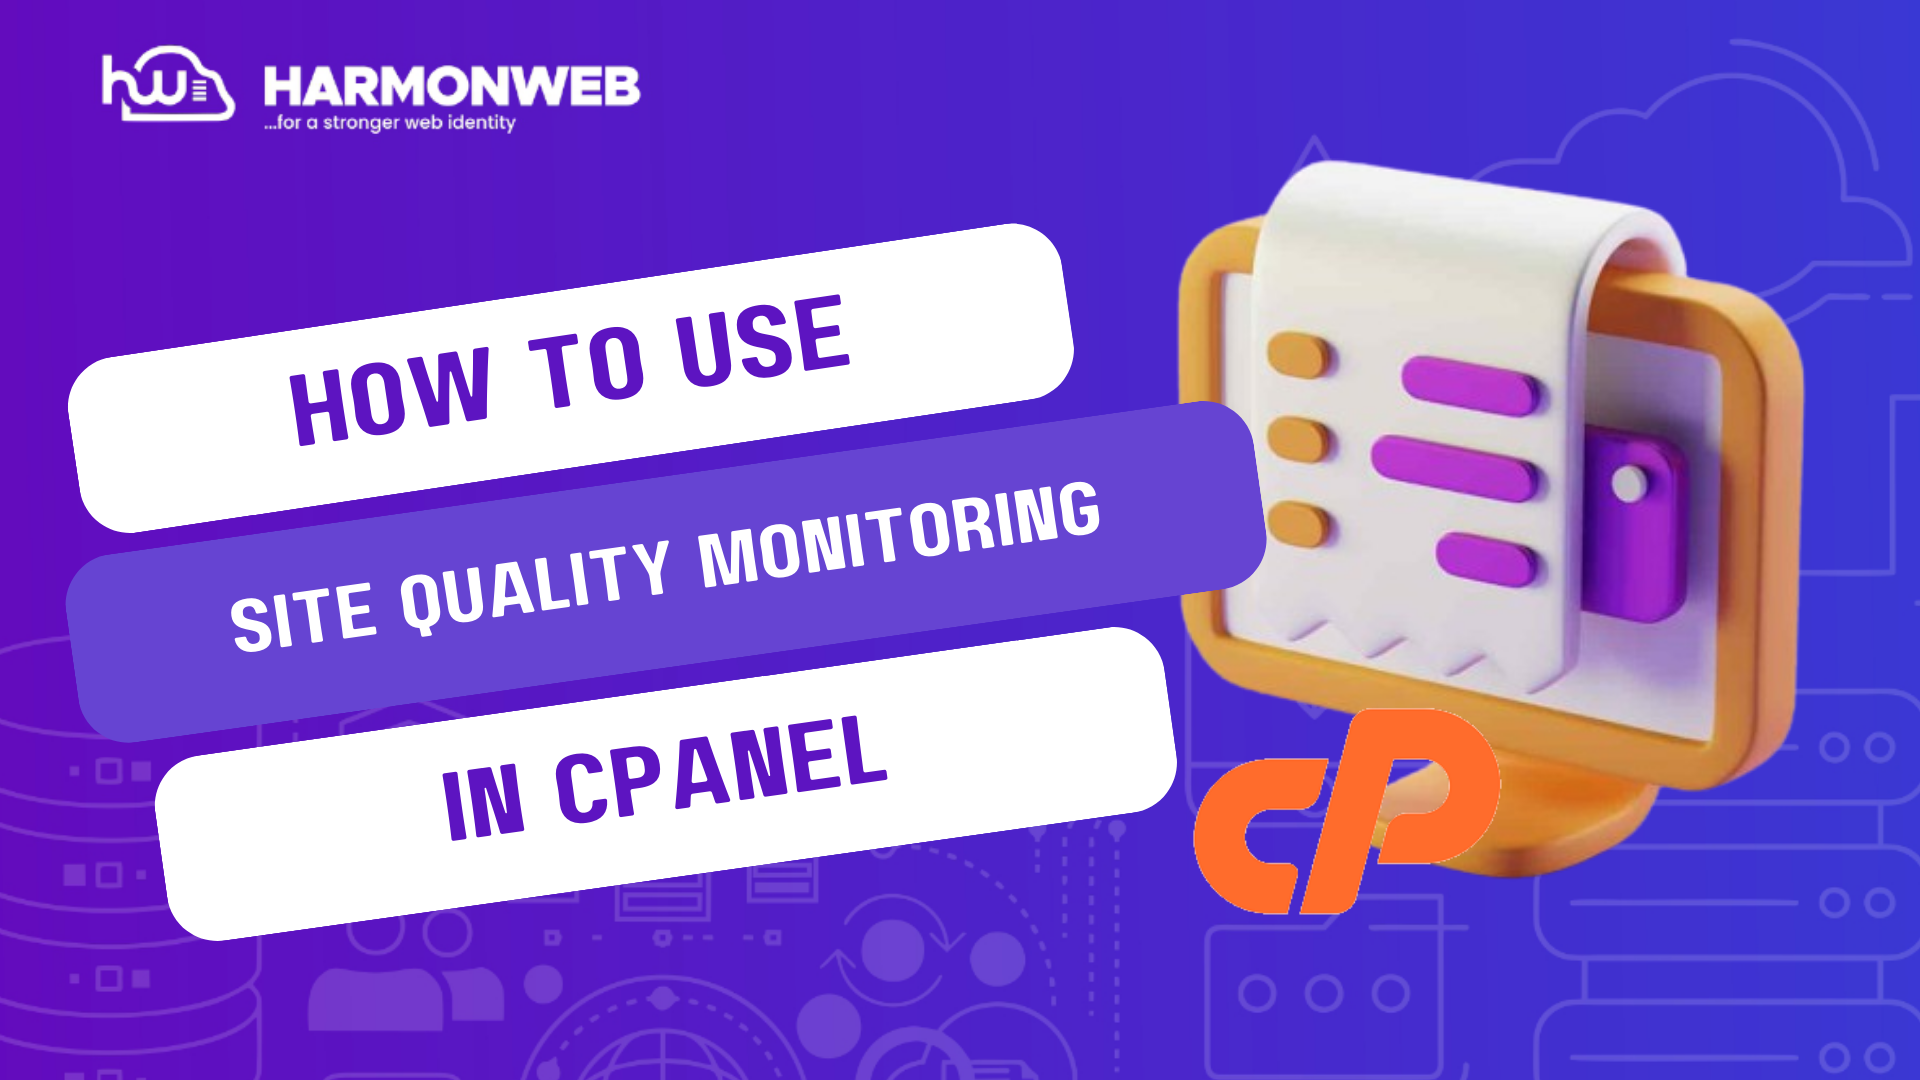 Site Quality Monitoring tool in cPanel